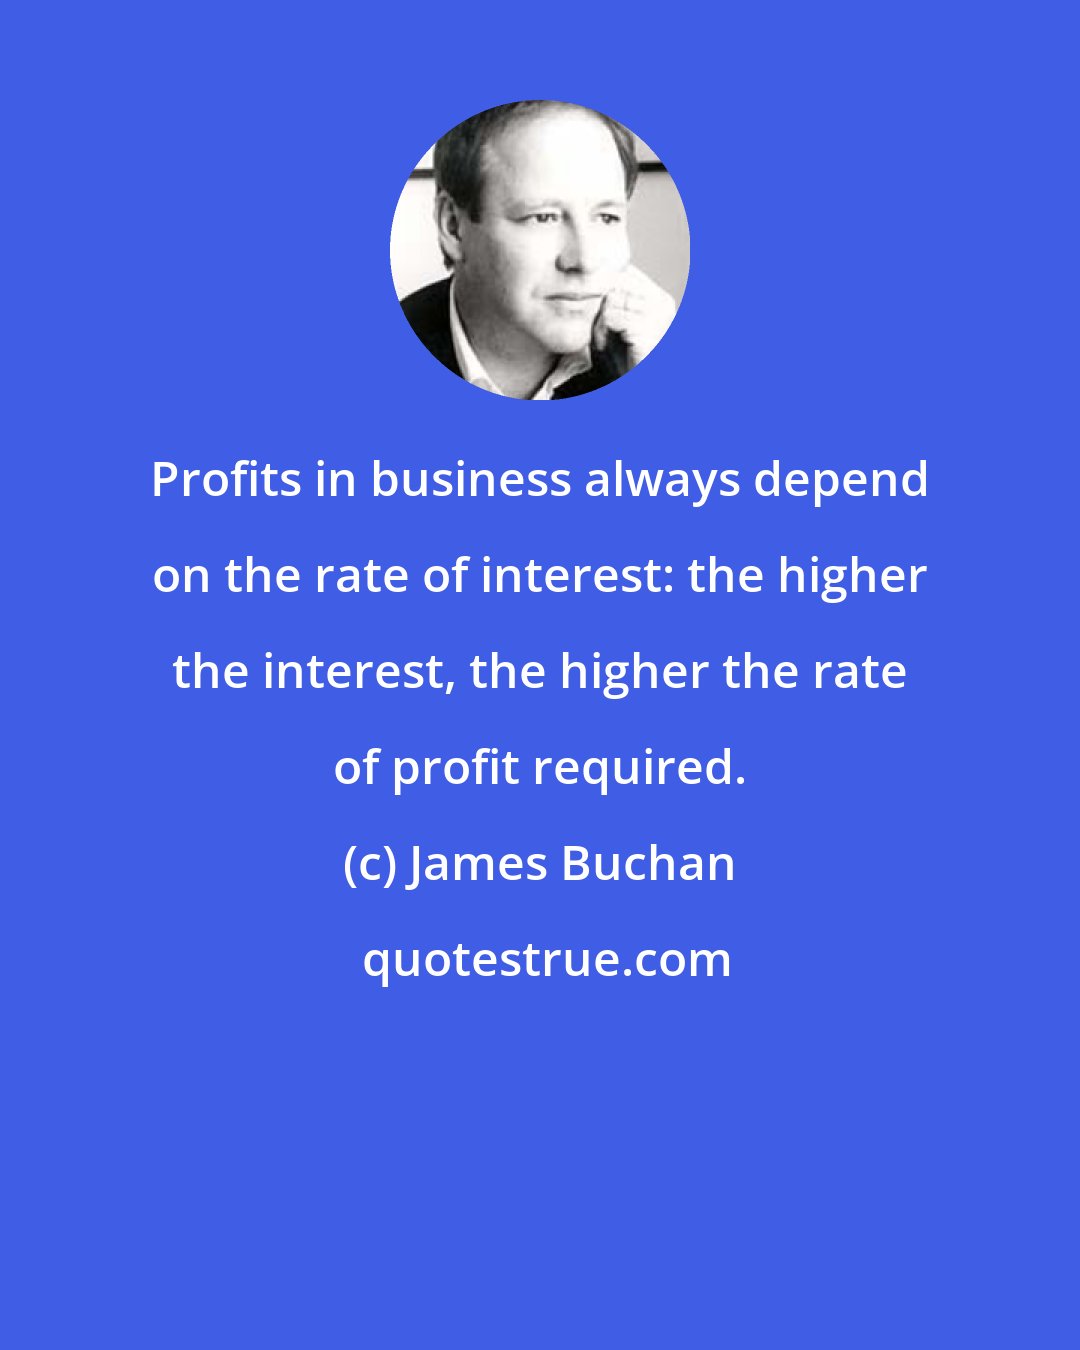 James Buchan: Profits in business always depend on the rate of interest: the higher the interest, the higher the rate of profit required.